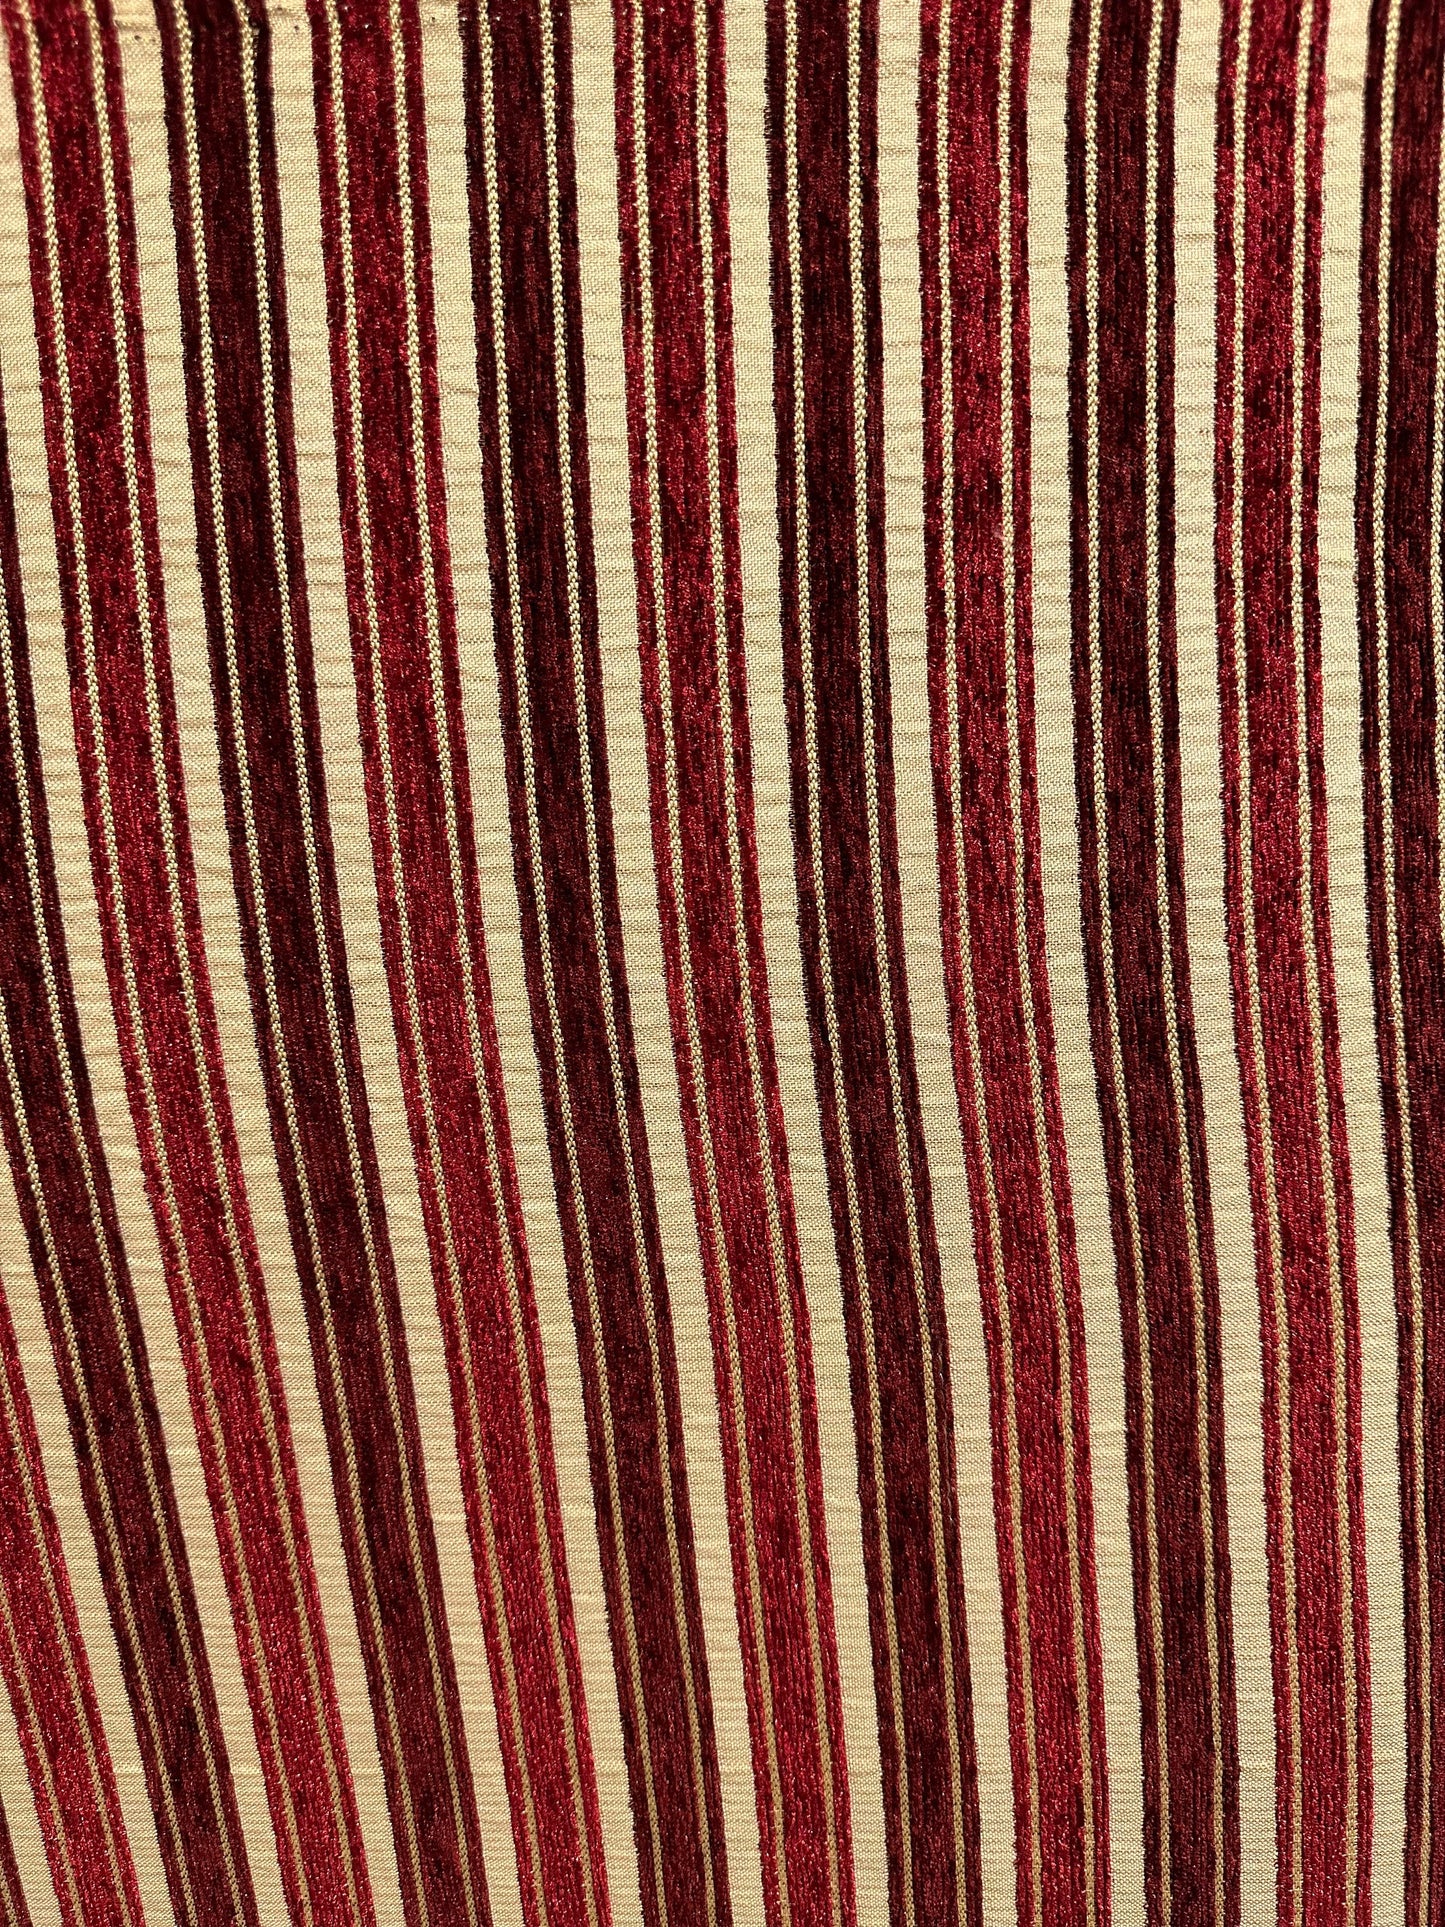 BURGUNDY BEIGE Striped Chenille Upholstery Brocade Fabric (56 in.) Sold By The Yard